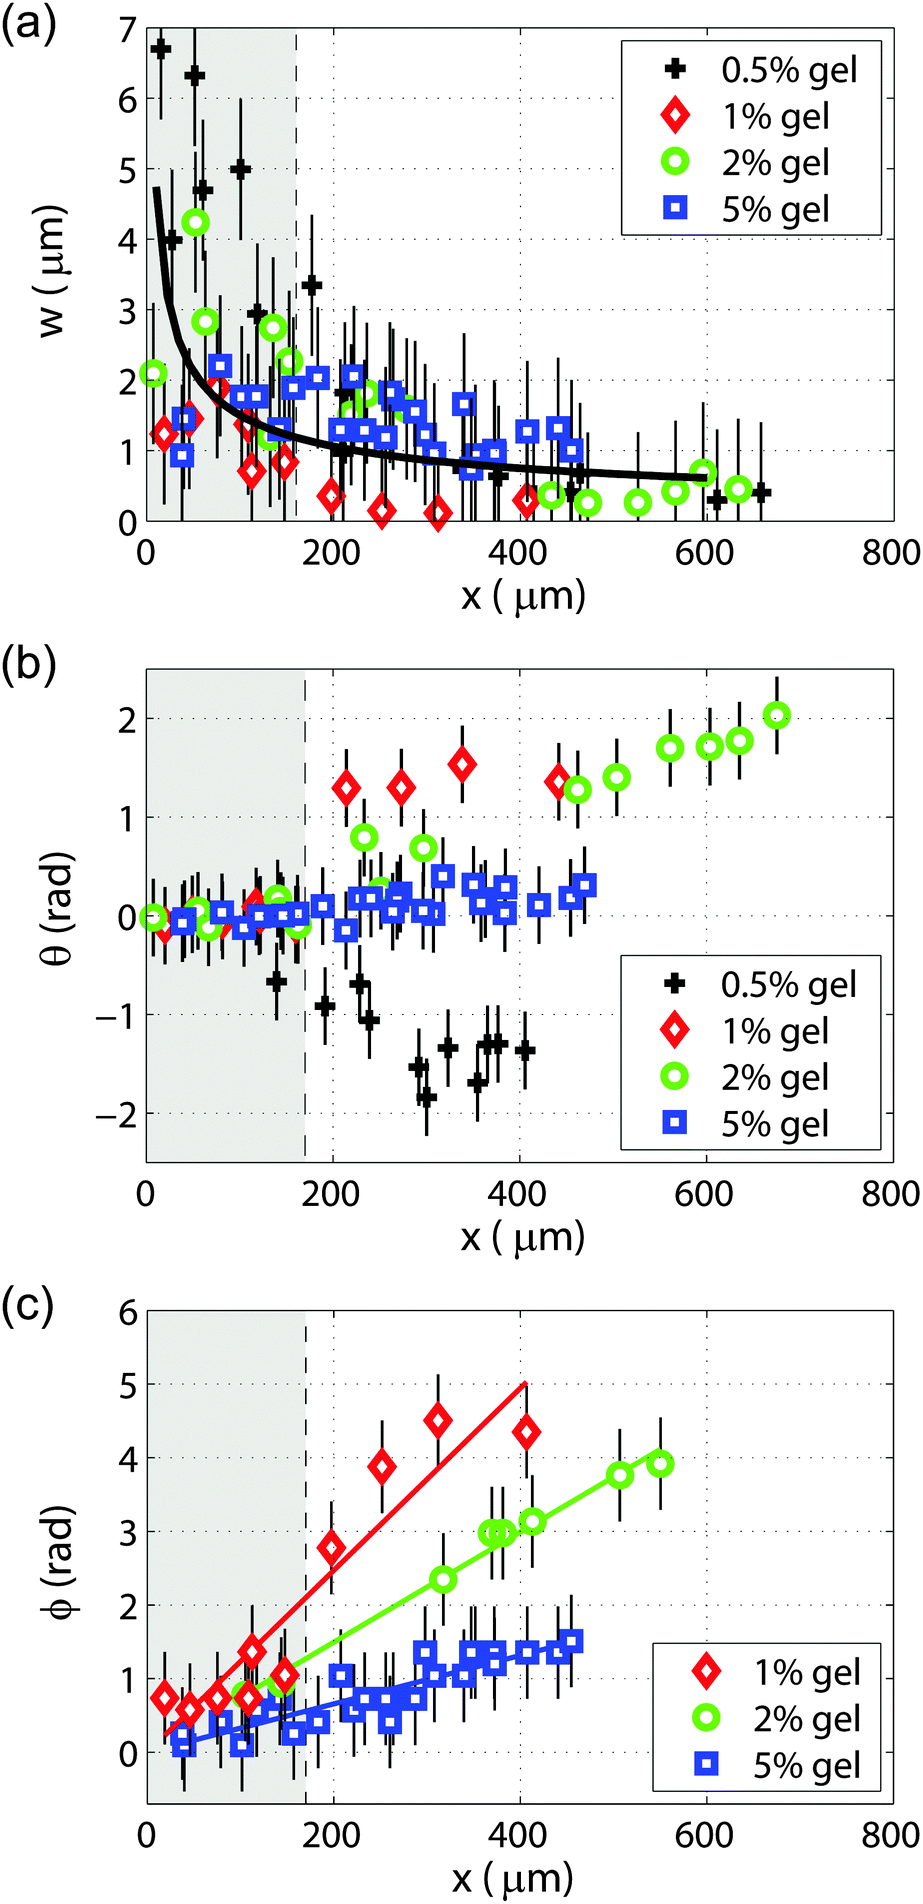 Surface Waves On A Soft Viscoelastic Layer Produced By An Oscillating Microbubble Soft Matter Rsc Publishing Doi 10 1039 C5smf